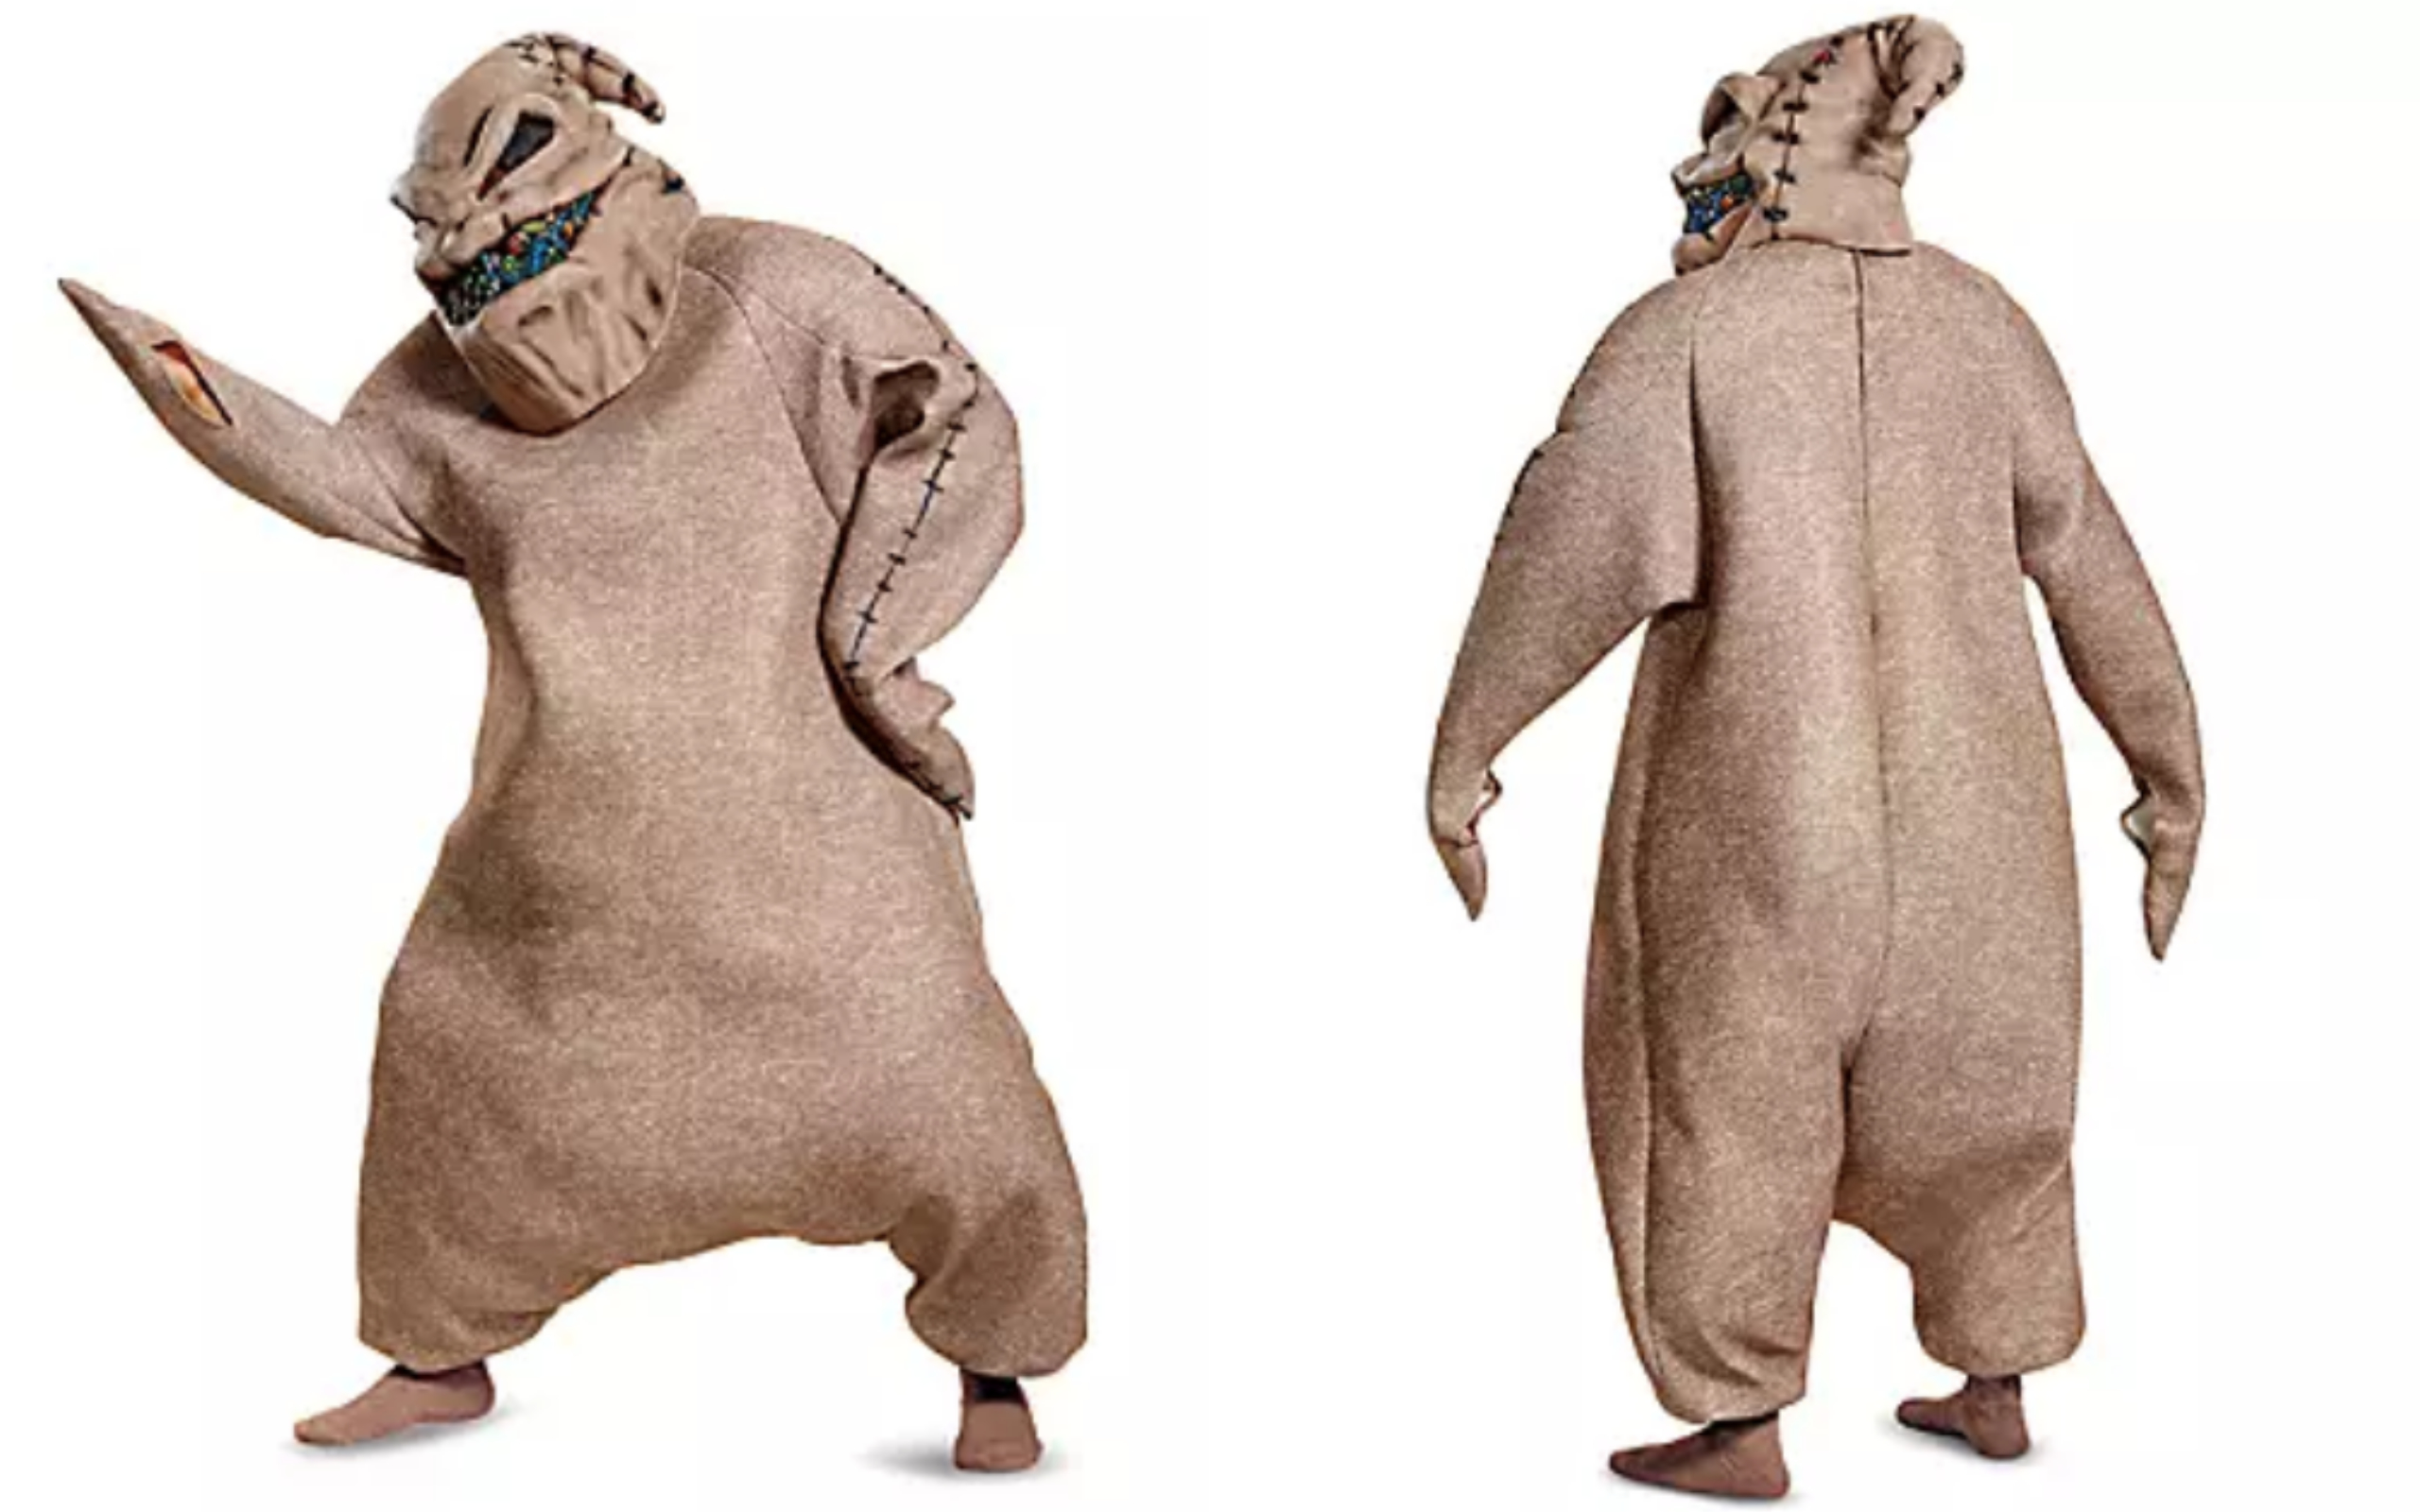 This Oogie Boogie Halloween Costume From Nightmare Before